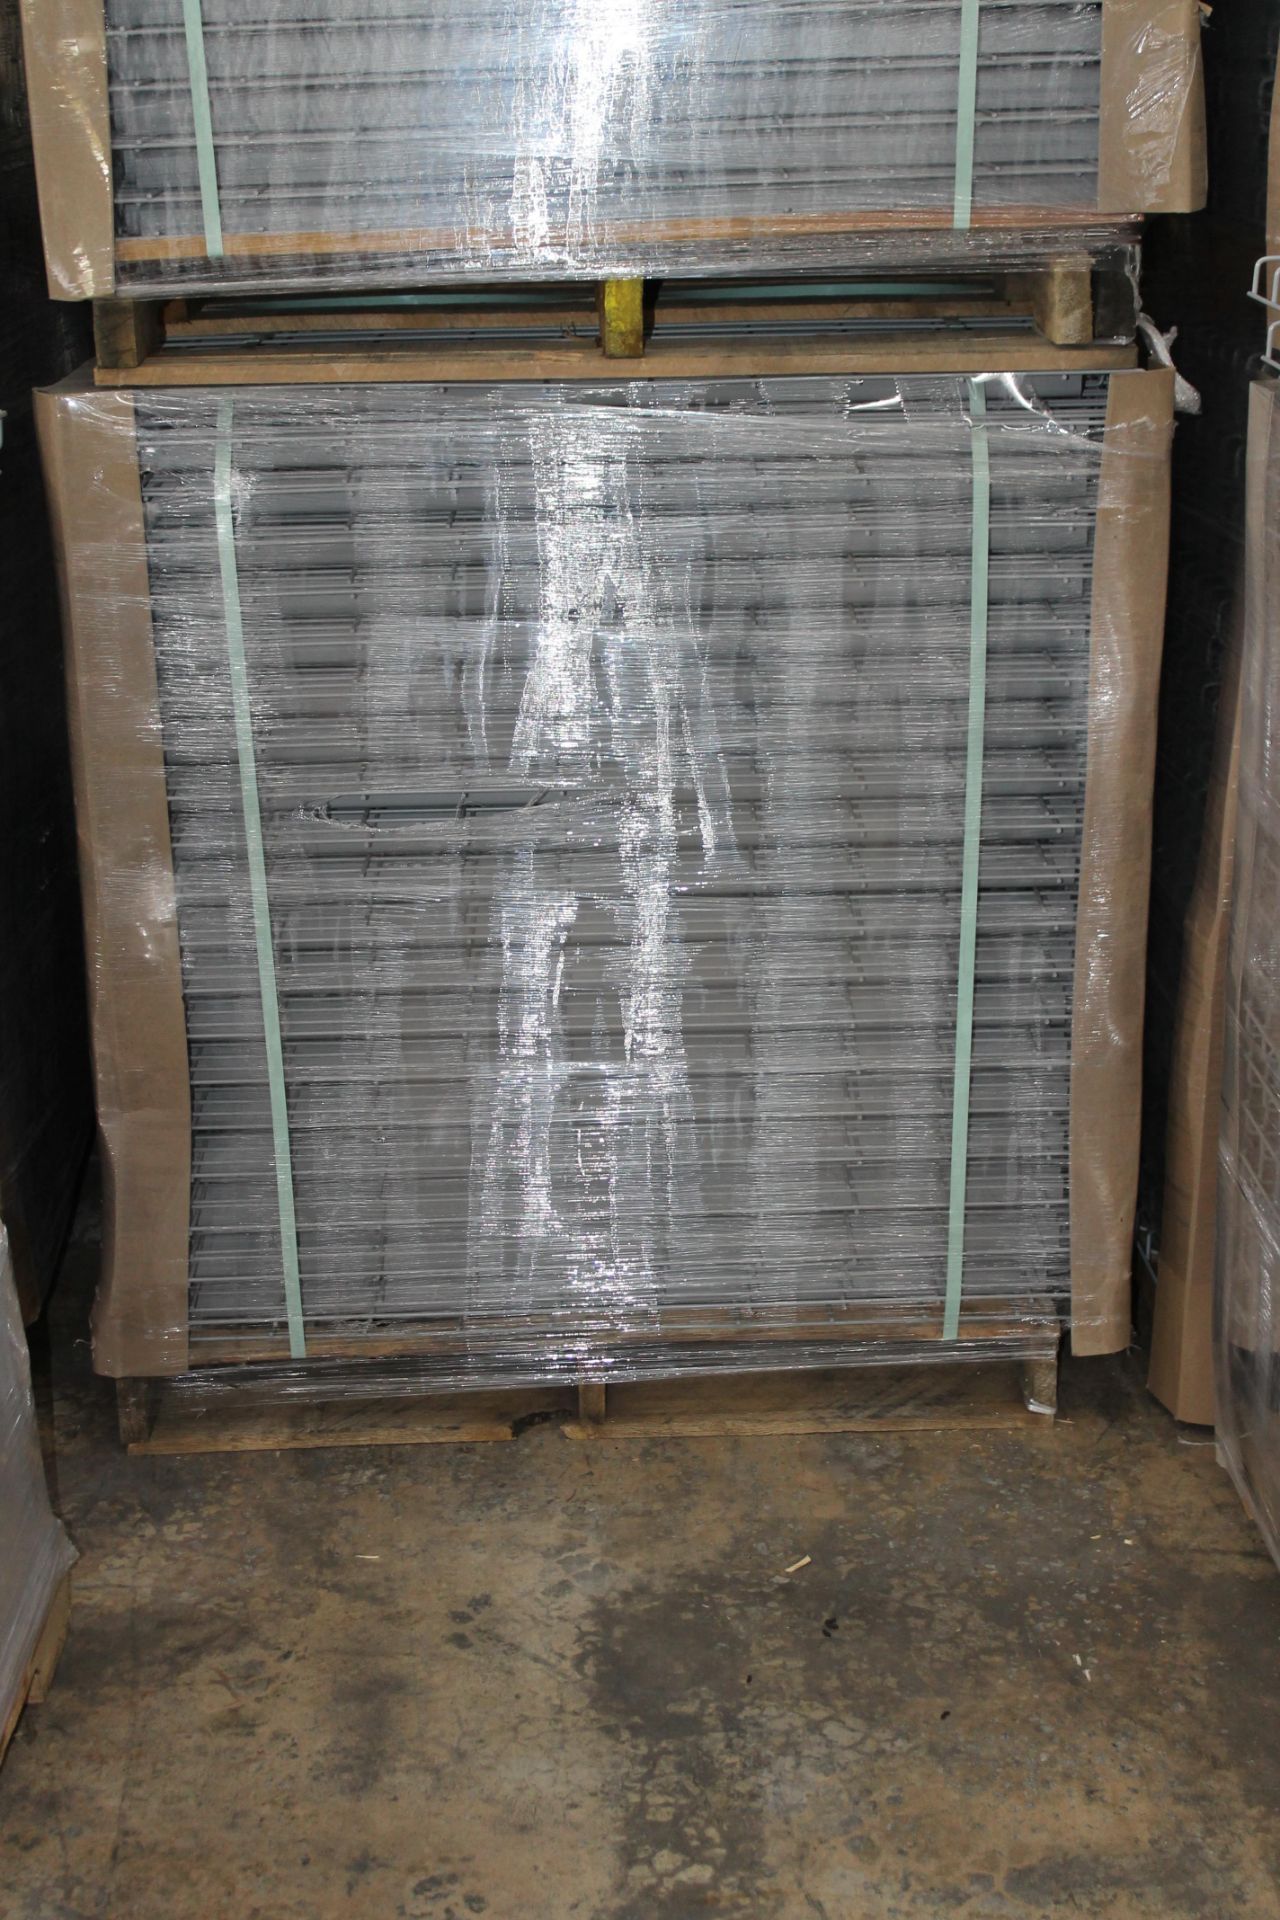 NEW 40 PCS OF STANDARD 42" X 46" WIREDECK - 2200 LBS CAPACITY - Image 2 of 2